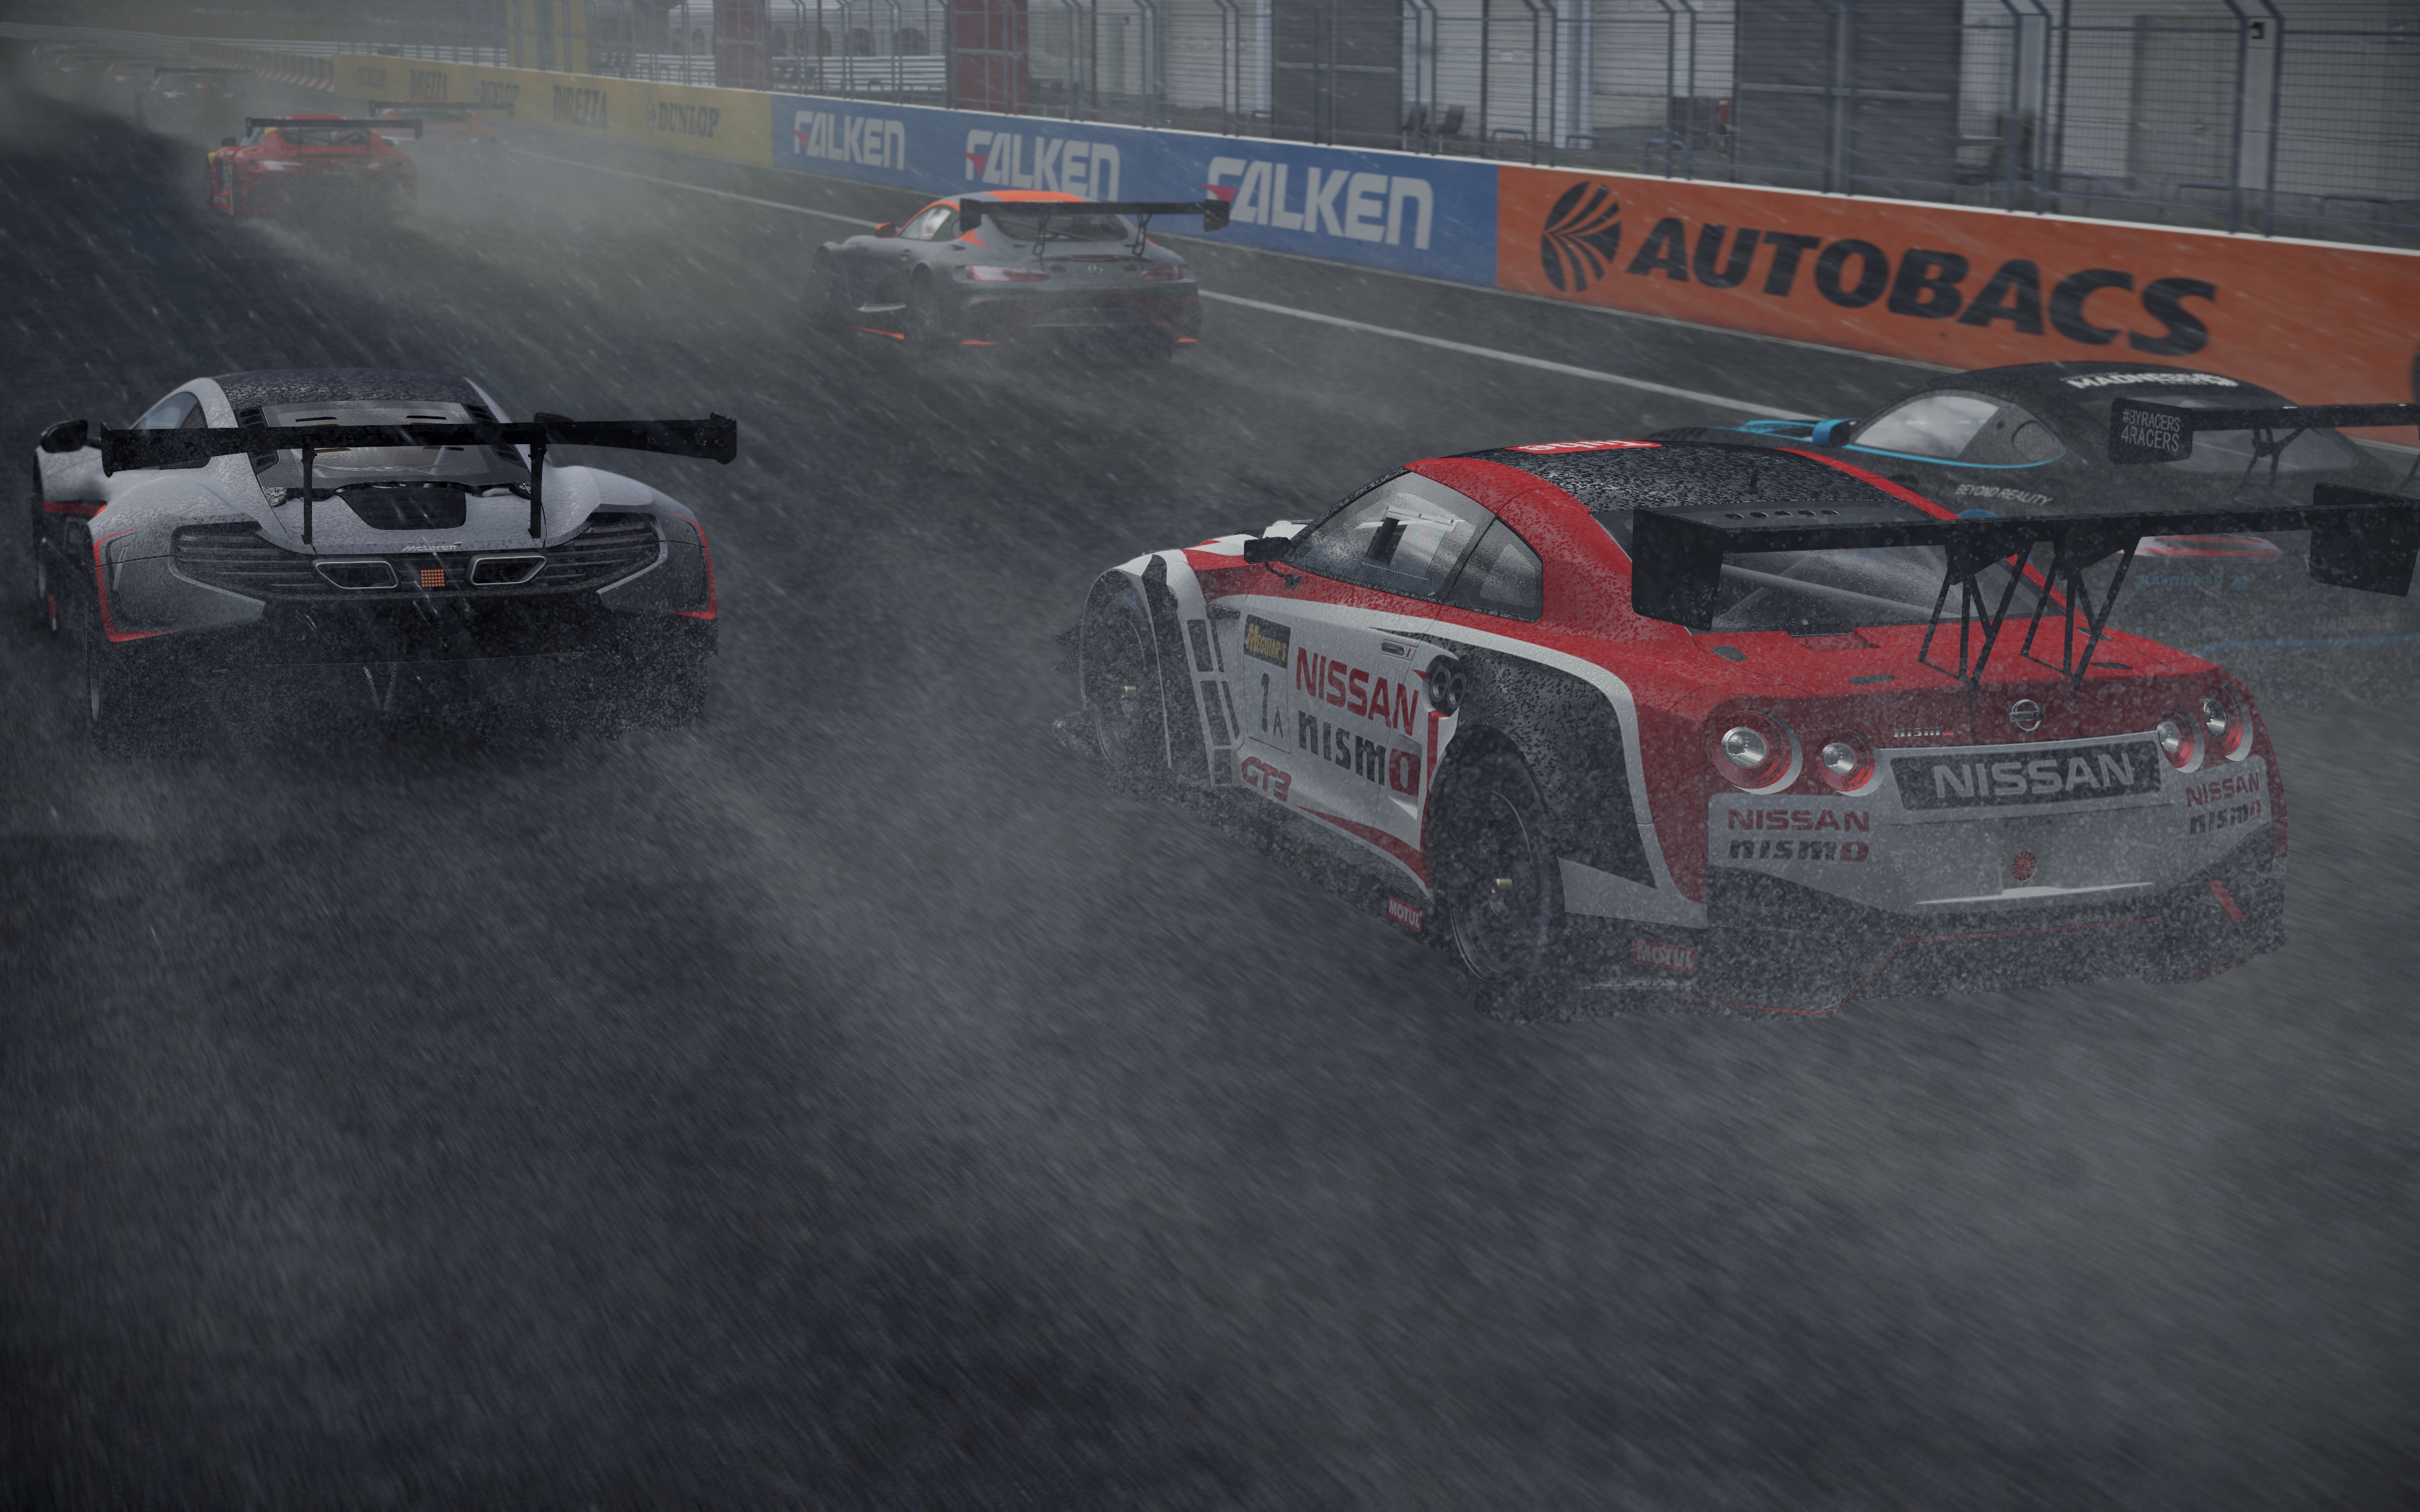 Media asset in full size related to 3dfxzone.it news item entitled as follows: Bandai Namco e Slightly Mad Studios annunciano il racing game Project CARS 2 | Image Name: news25776_Project-CARS-2-Screenshot_8.jpg